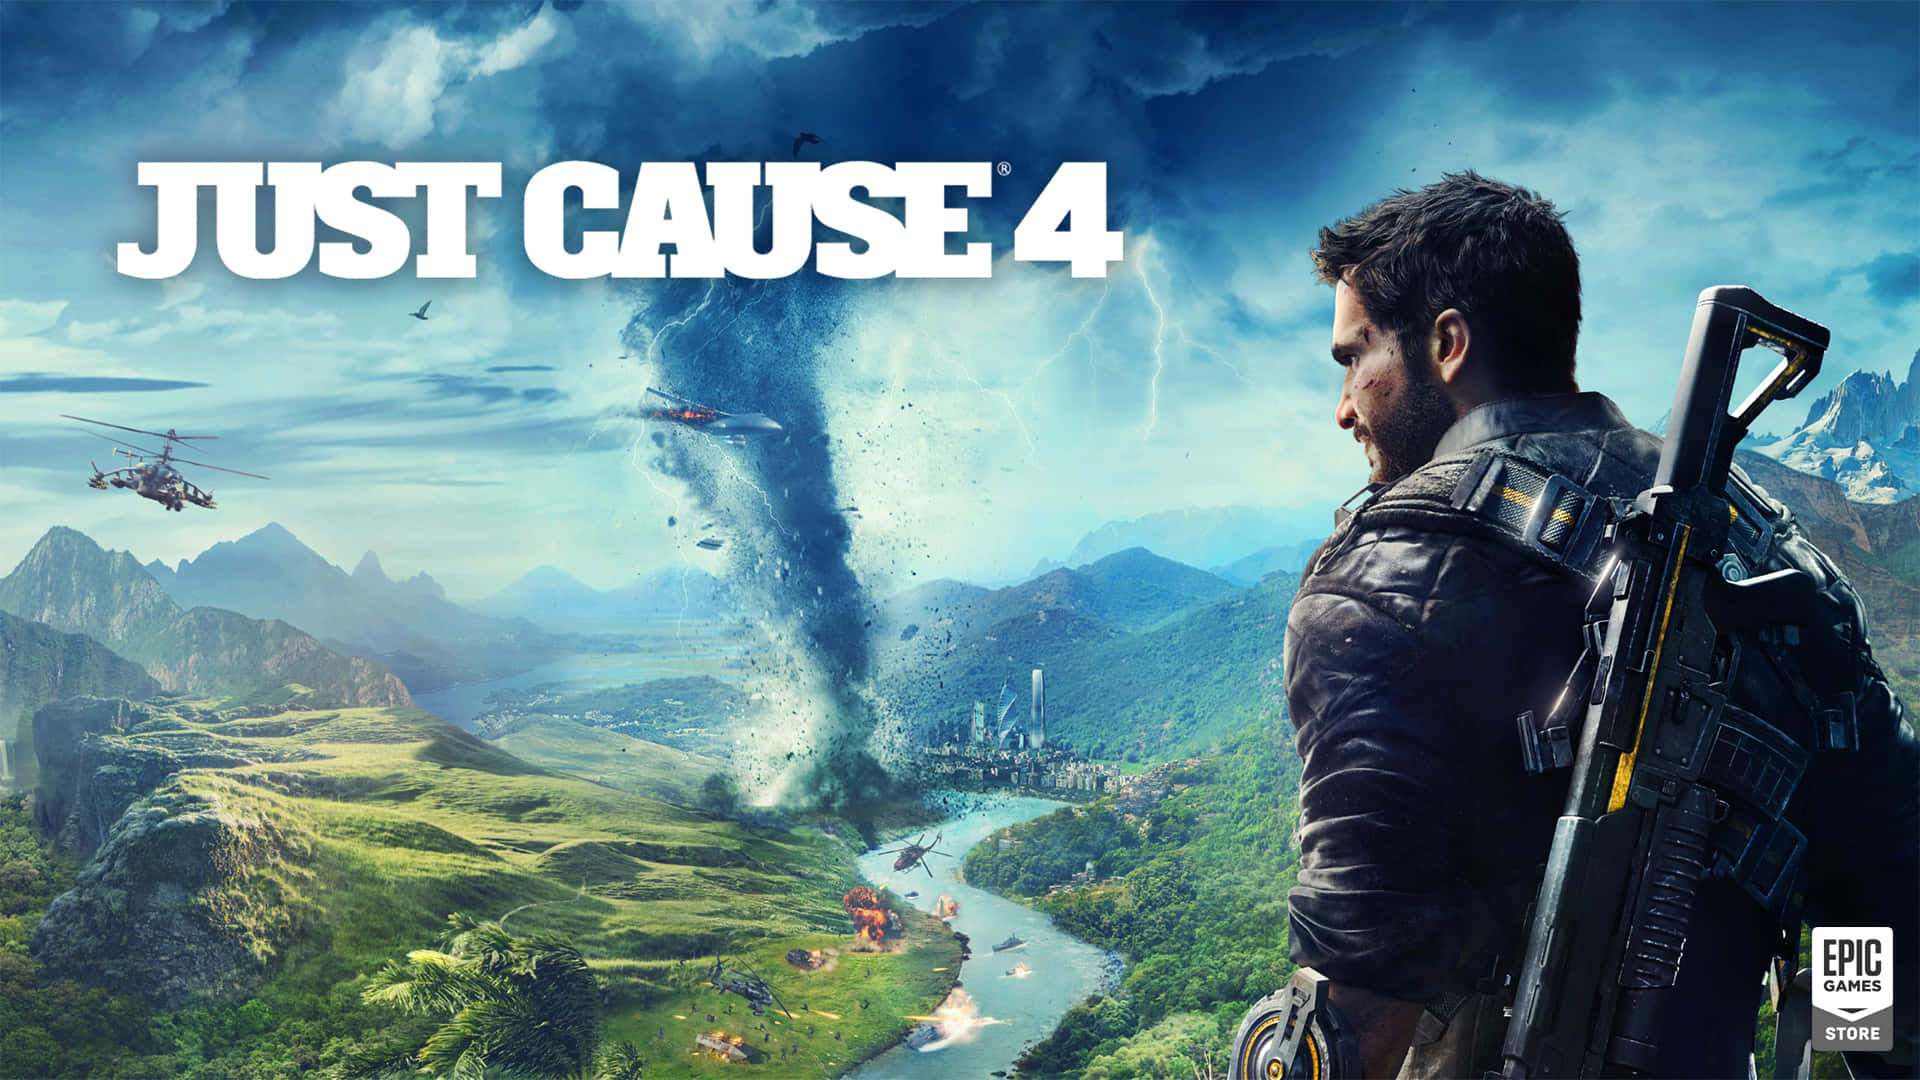 Captivating 1920x1080 Just Cause 4 Background